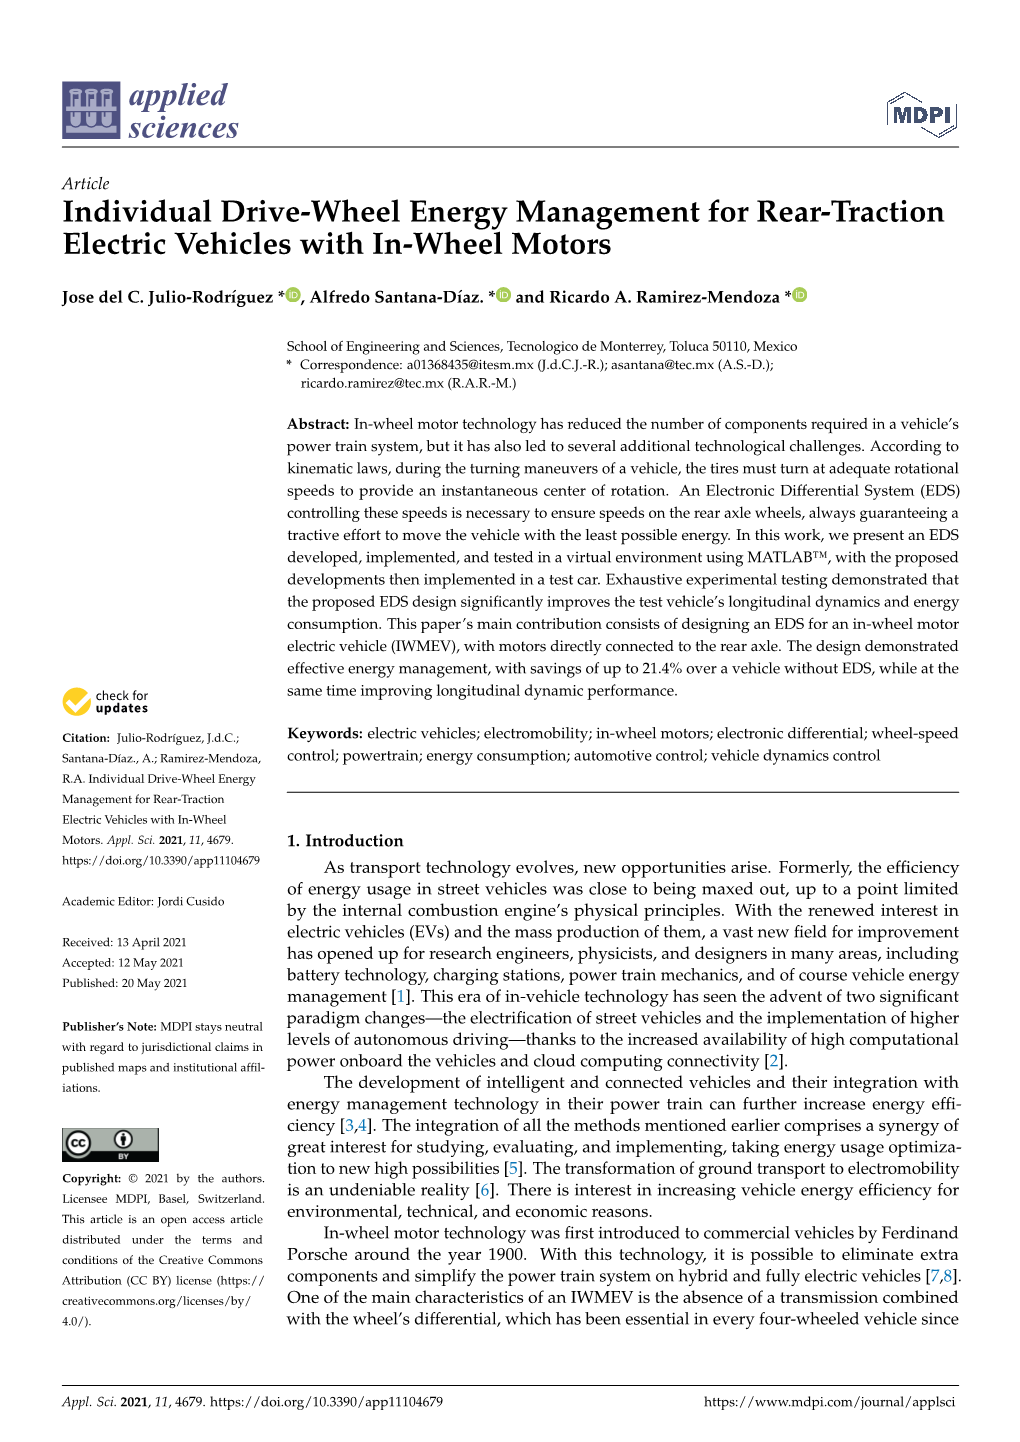 Individual Drive-Wheel Energy Management for Rear-Traction Electric Vehicles with In-Wheel Motors